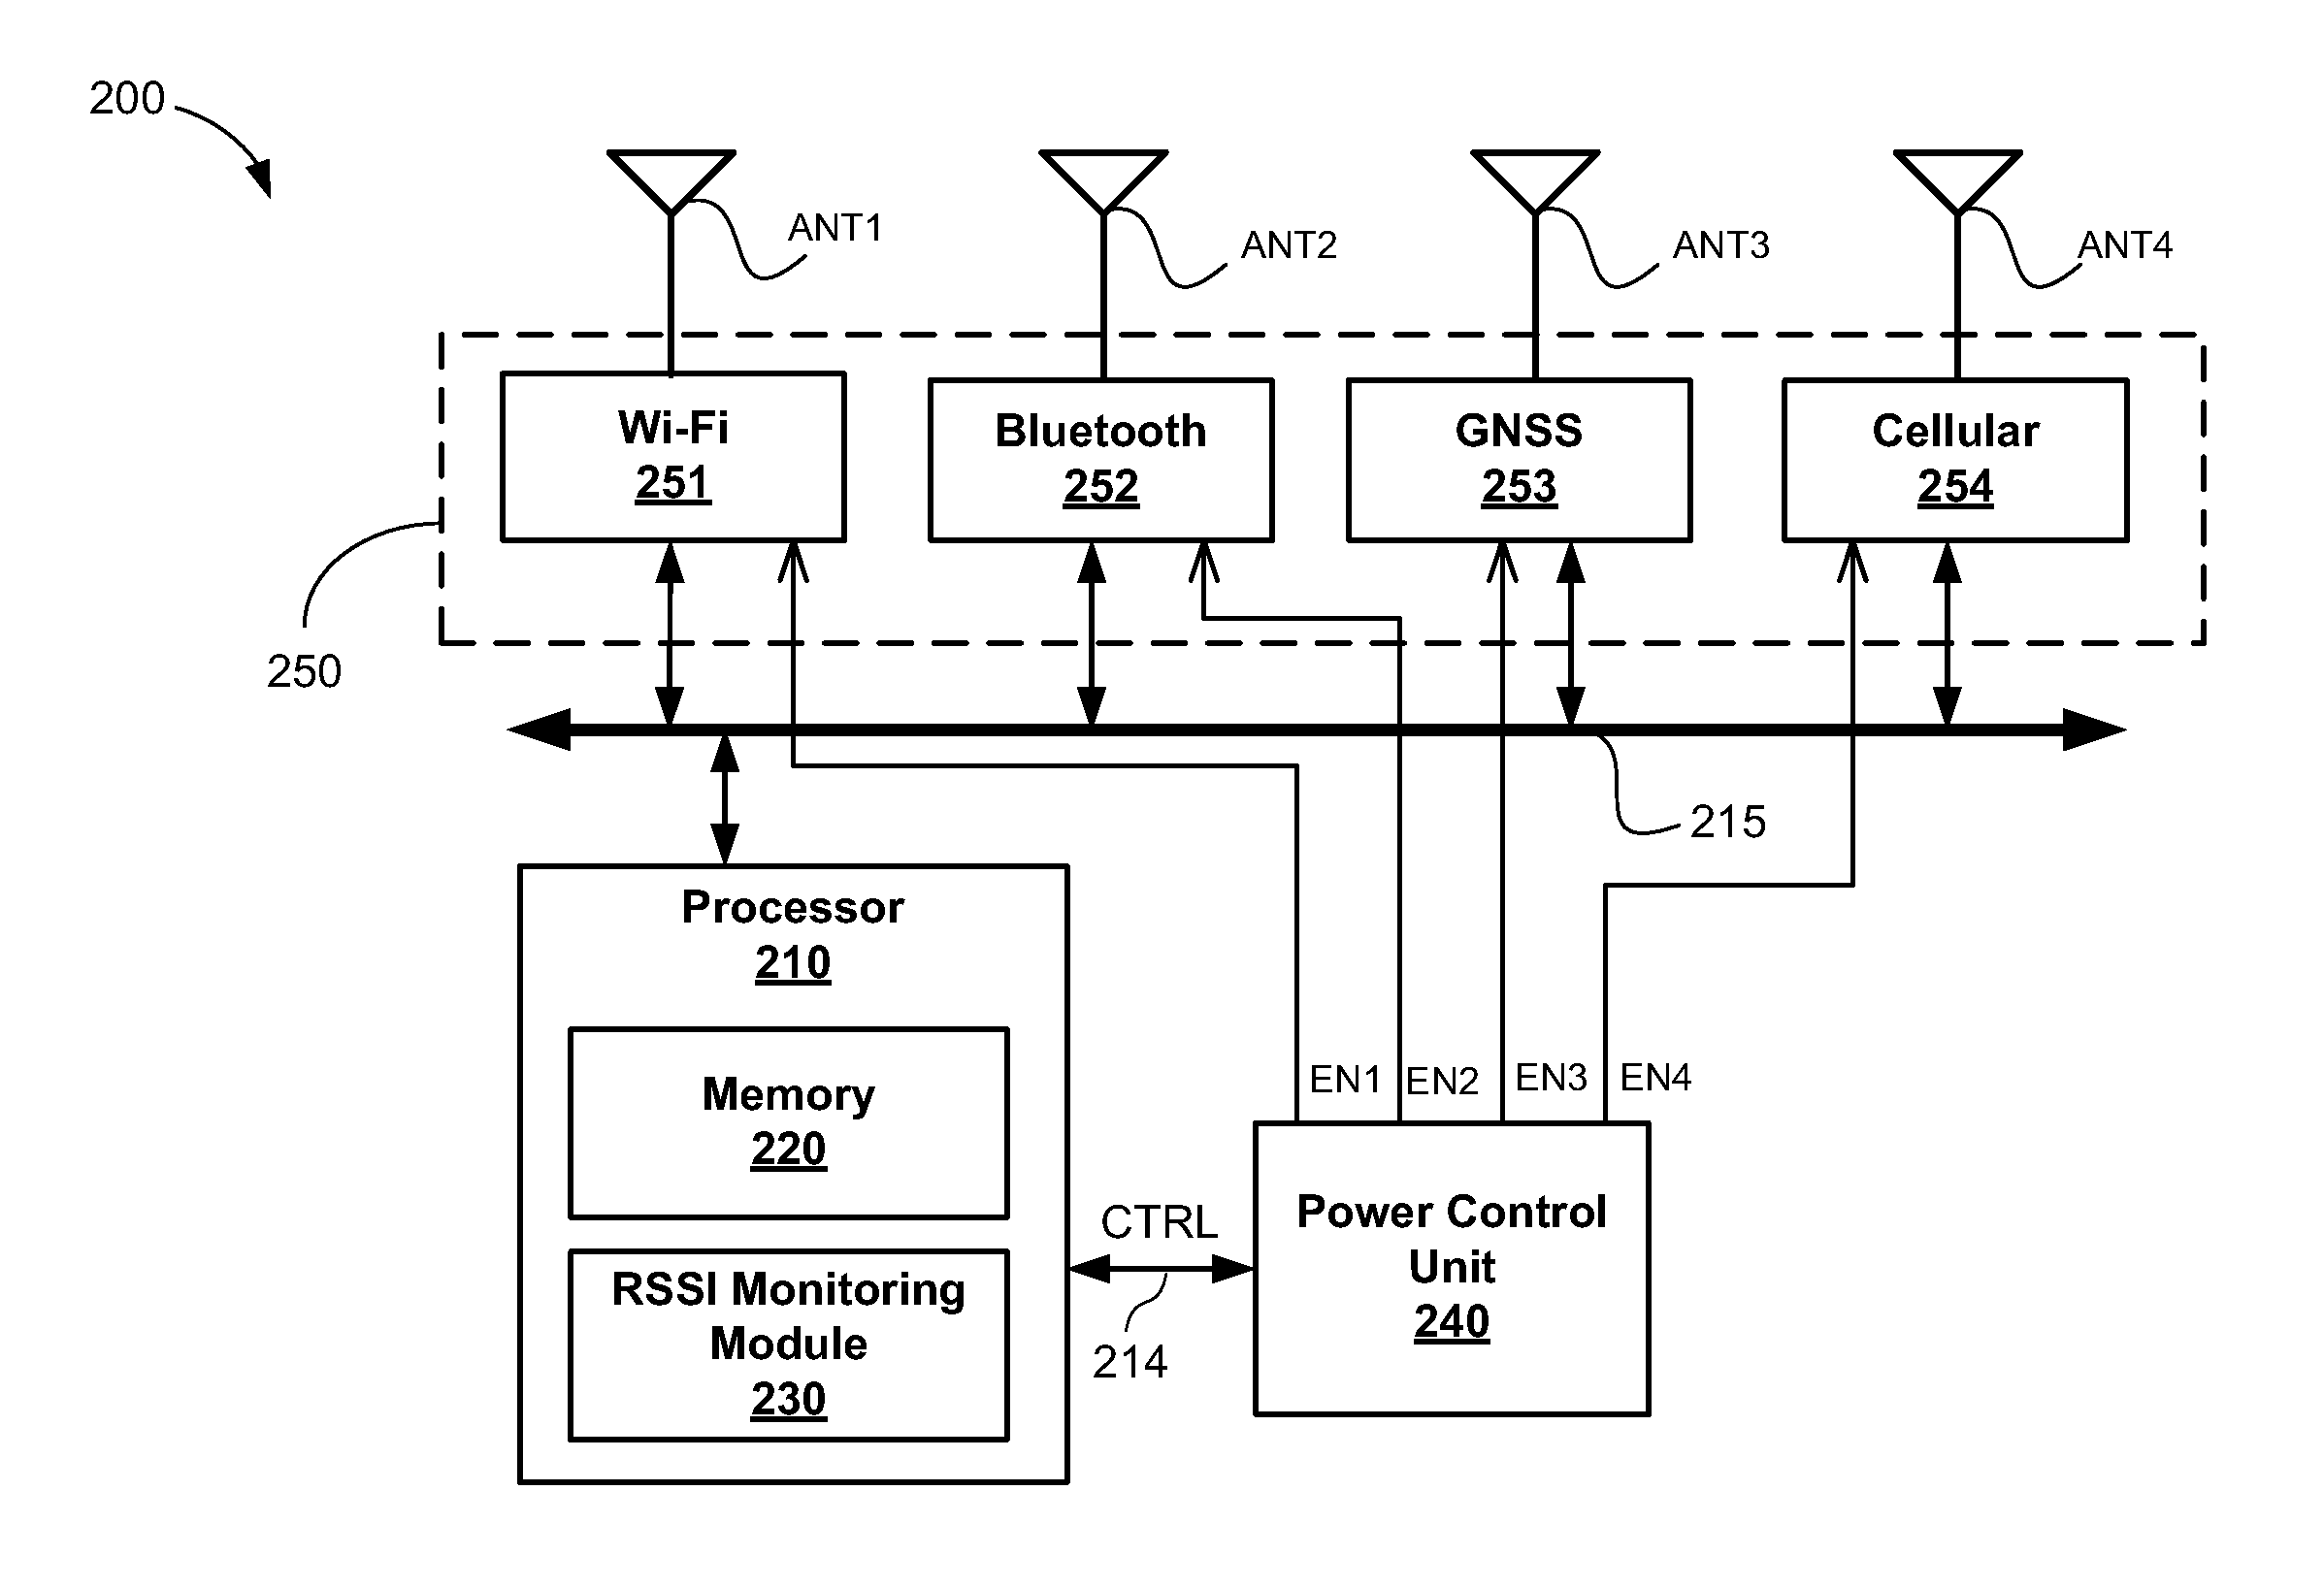 Reducing power consumption in a mobile communication device in response to motion detection